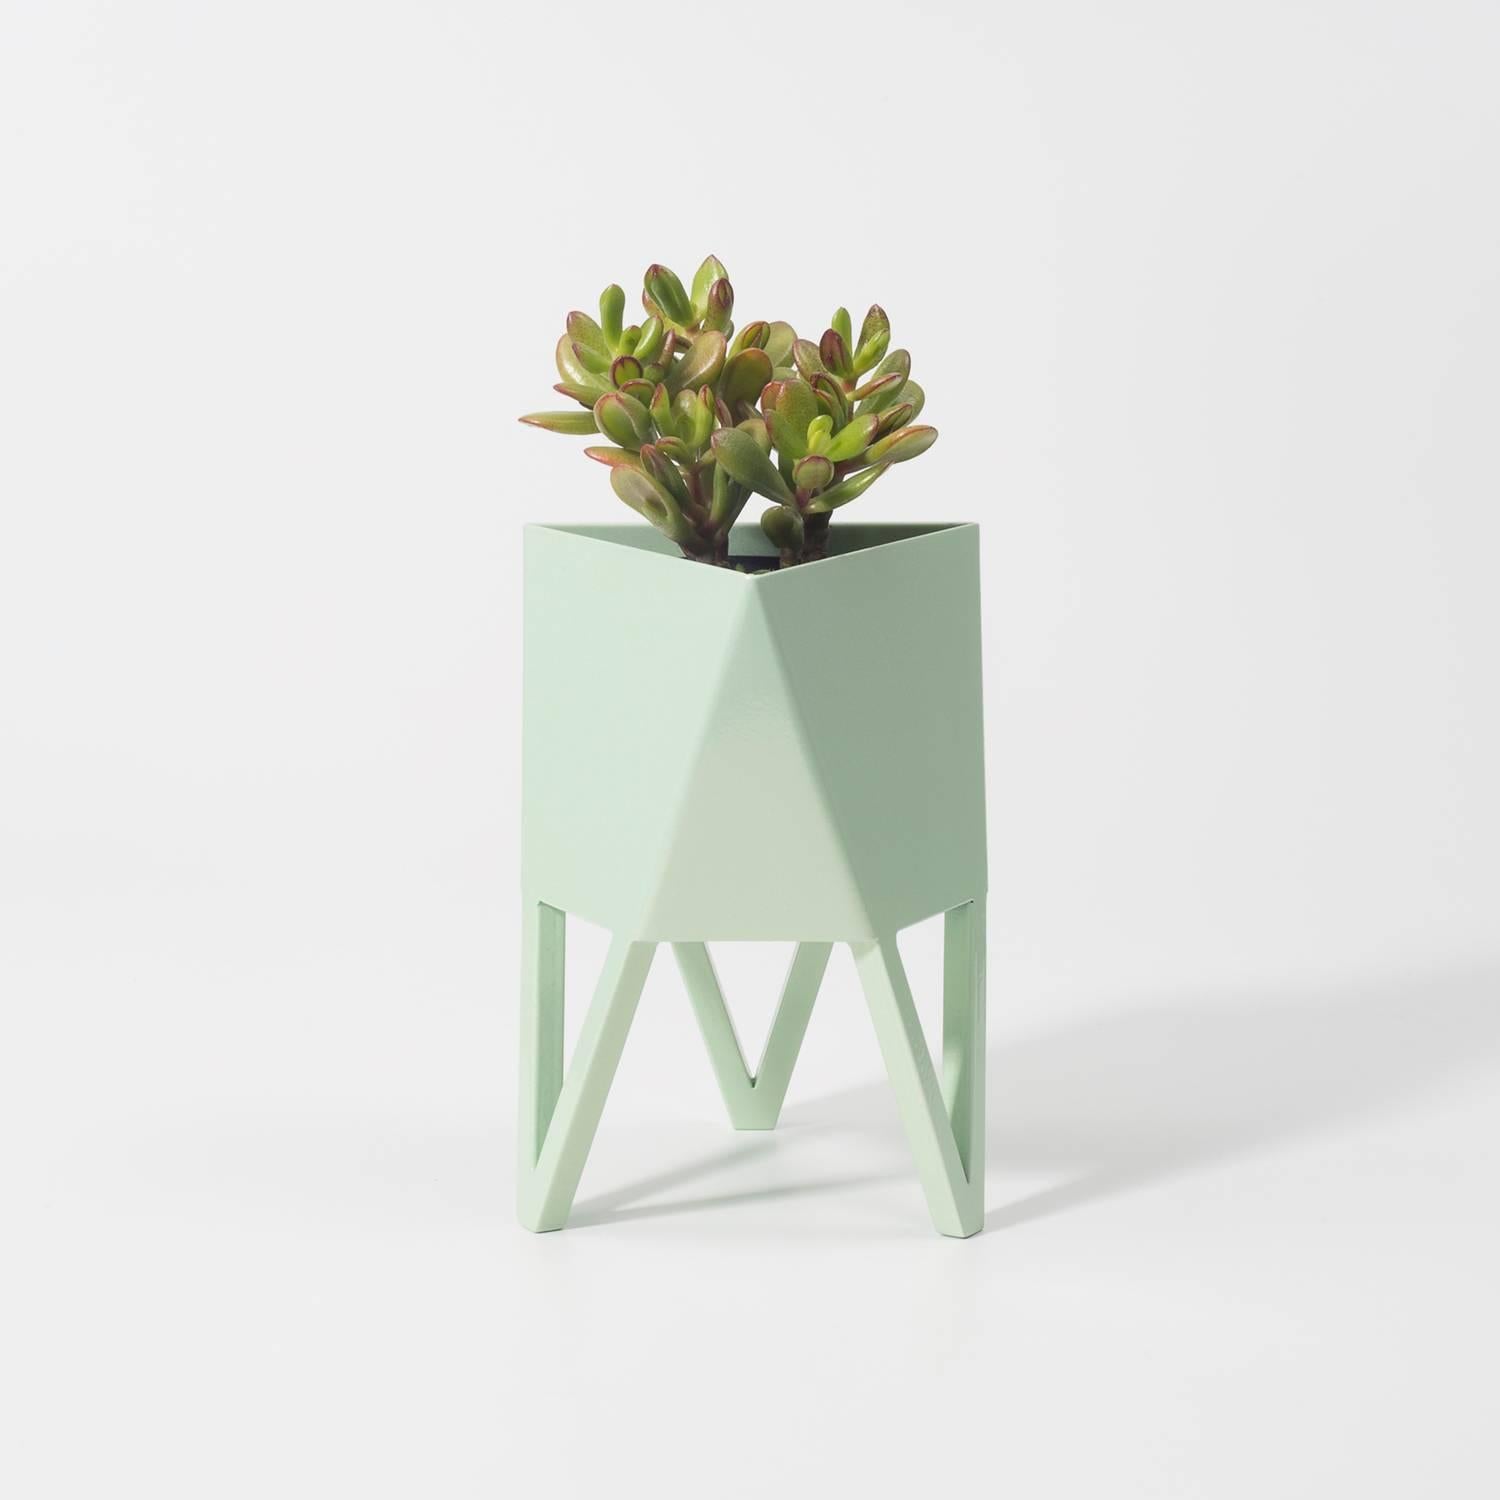 Deca Planter in Small, Gray Steel by Force/Collide 2